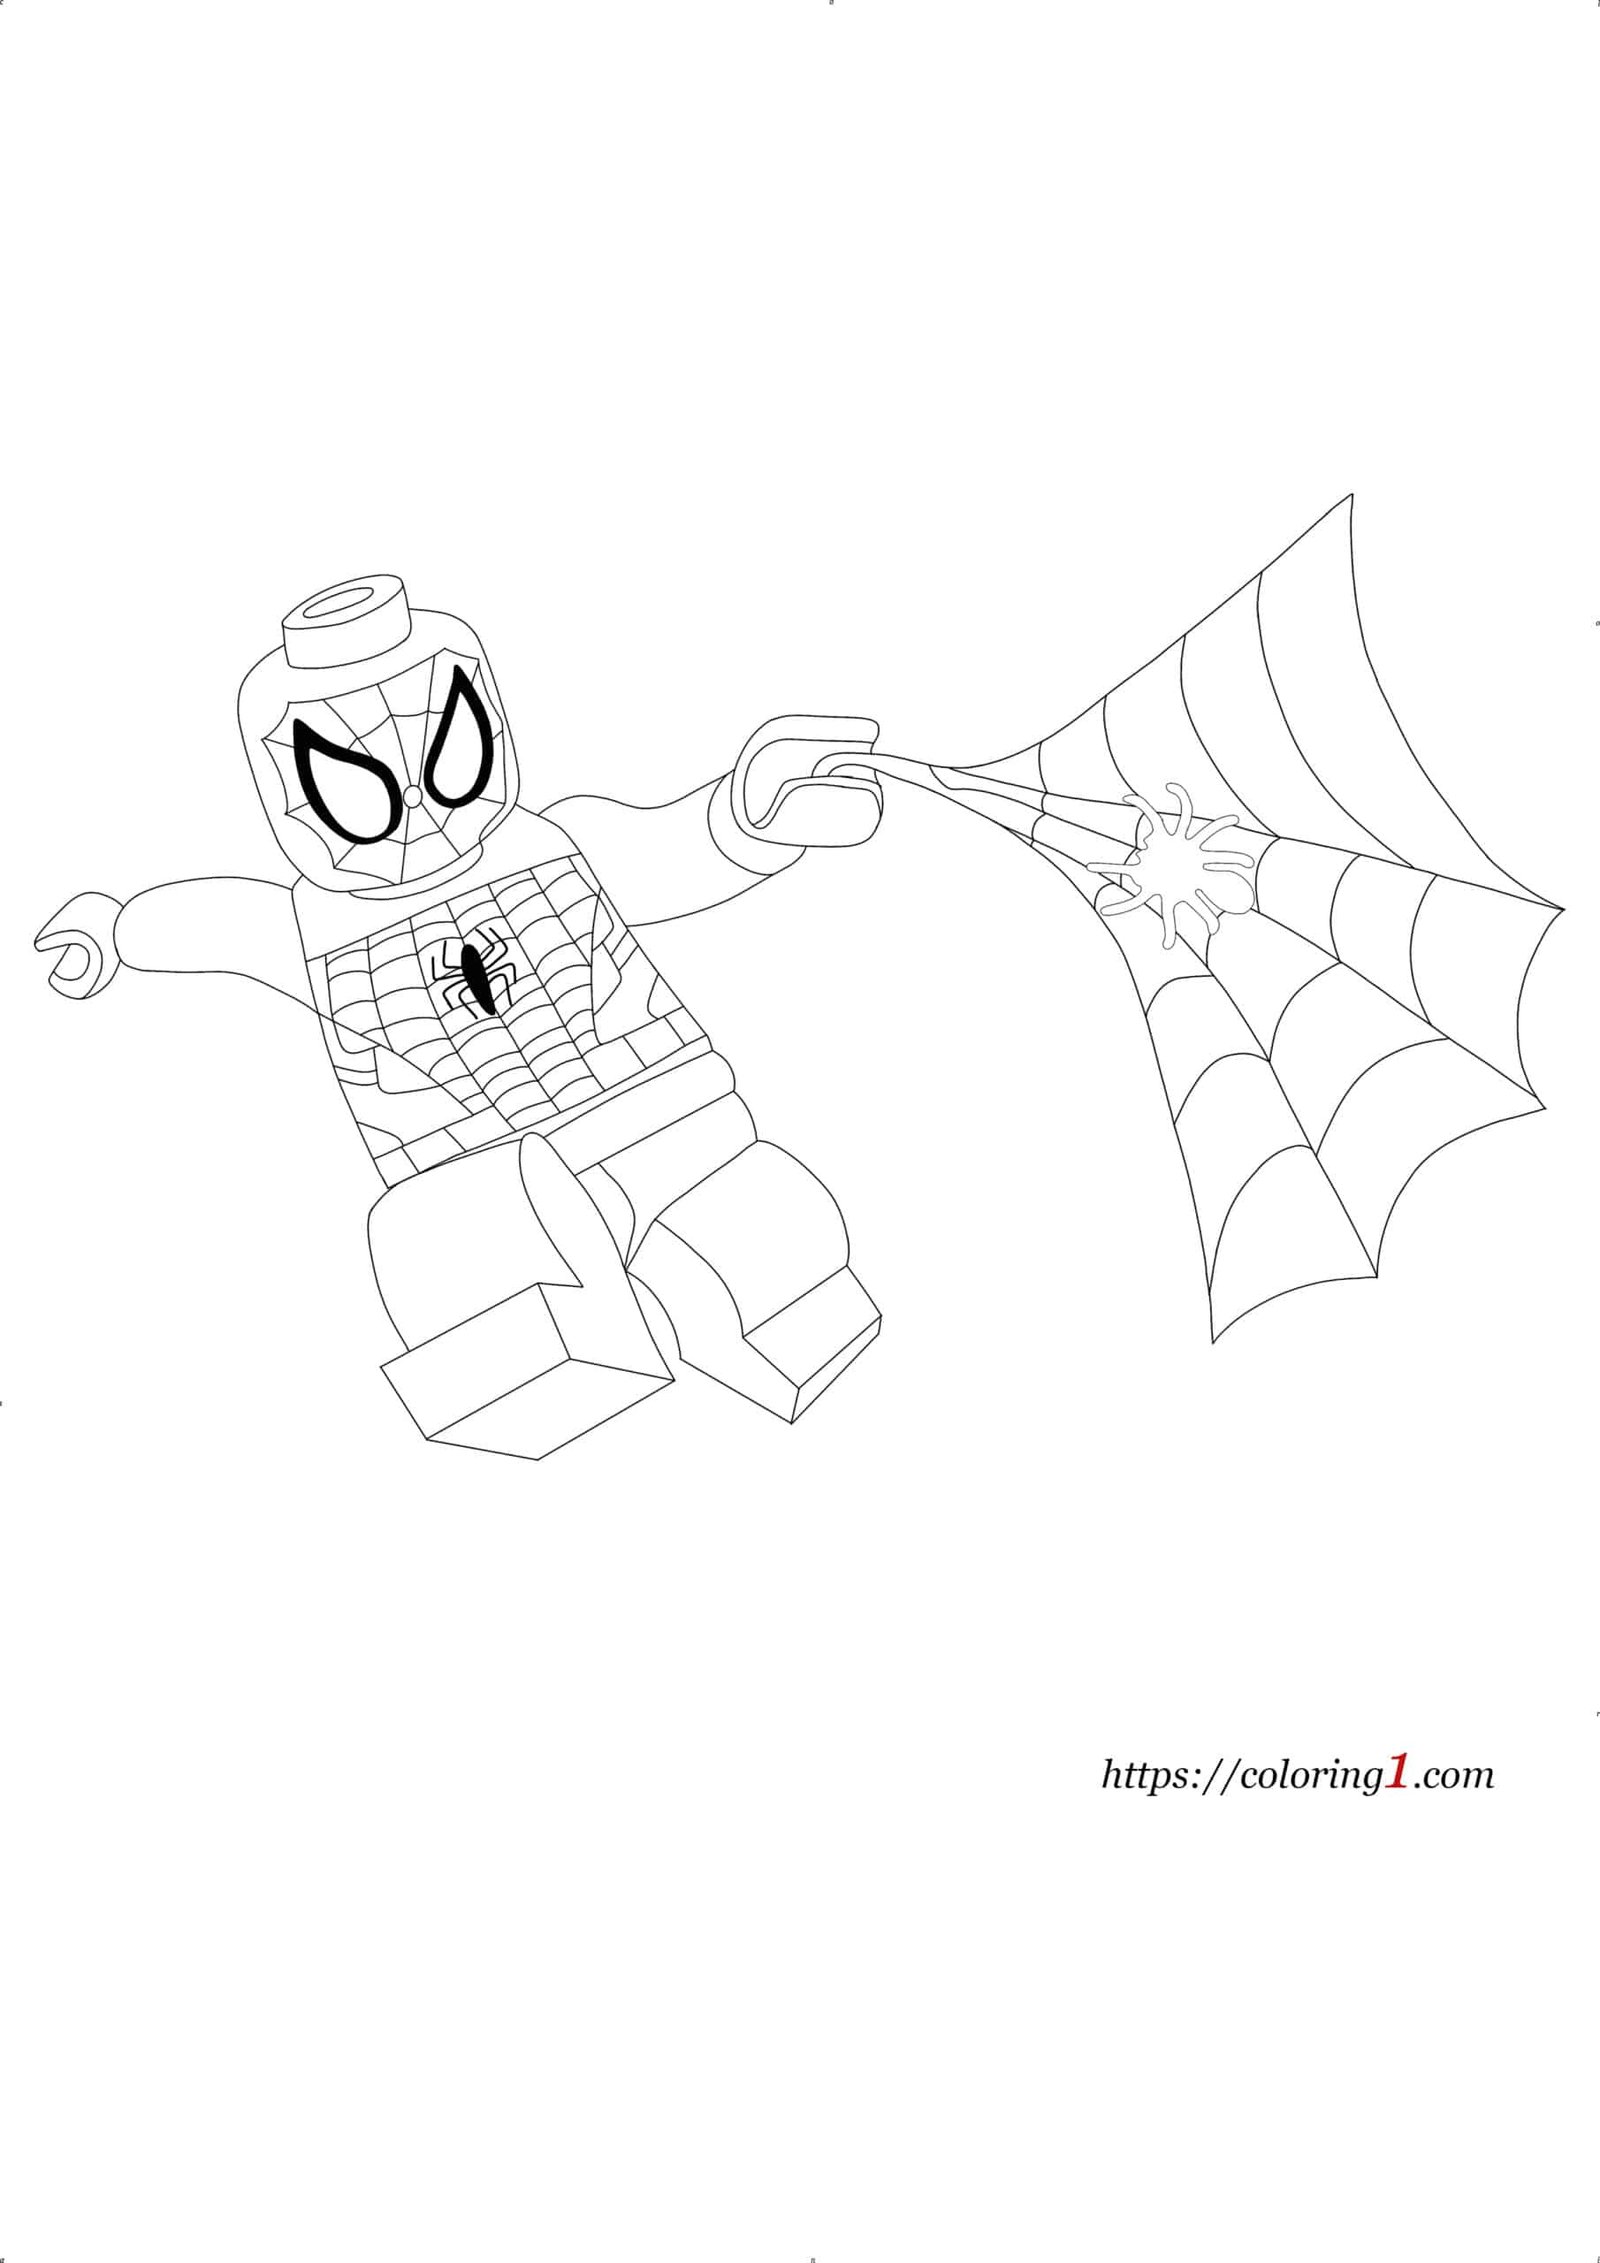 Lego Spiderman coloring page